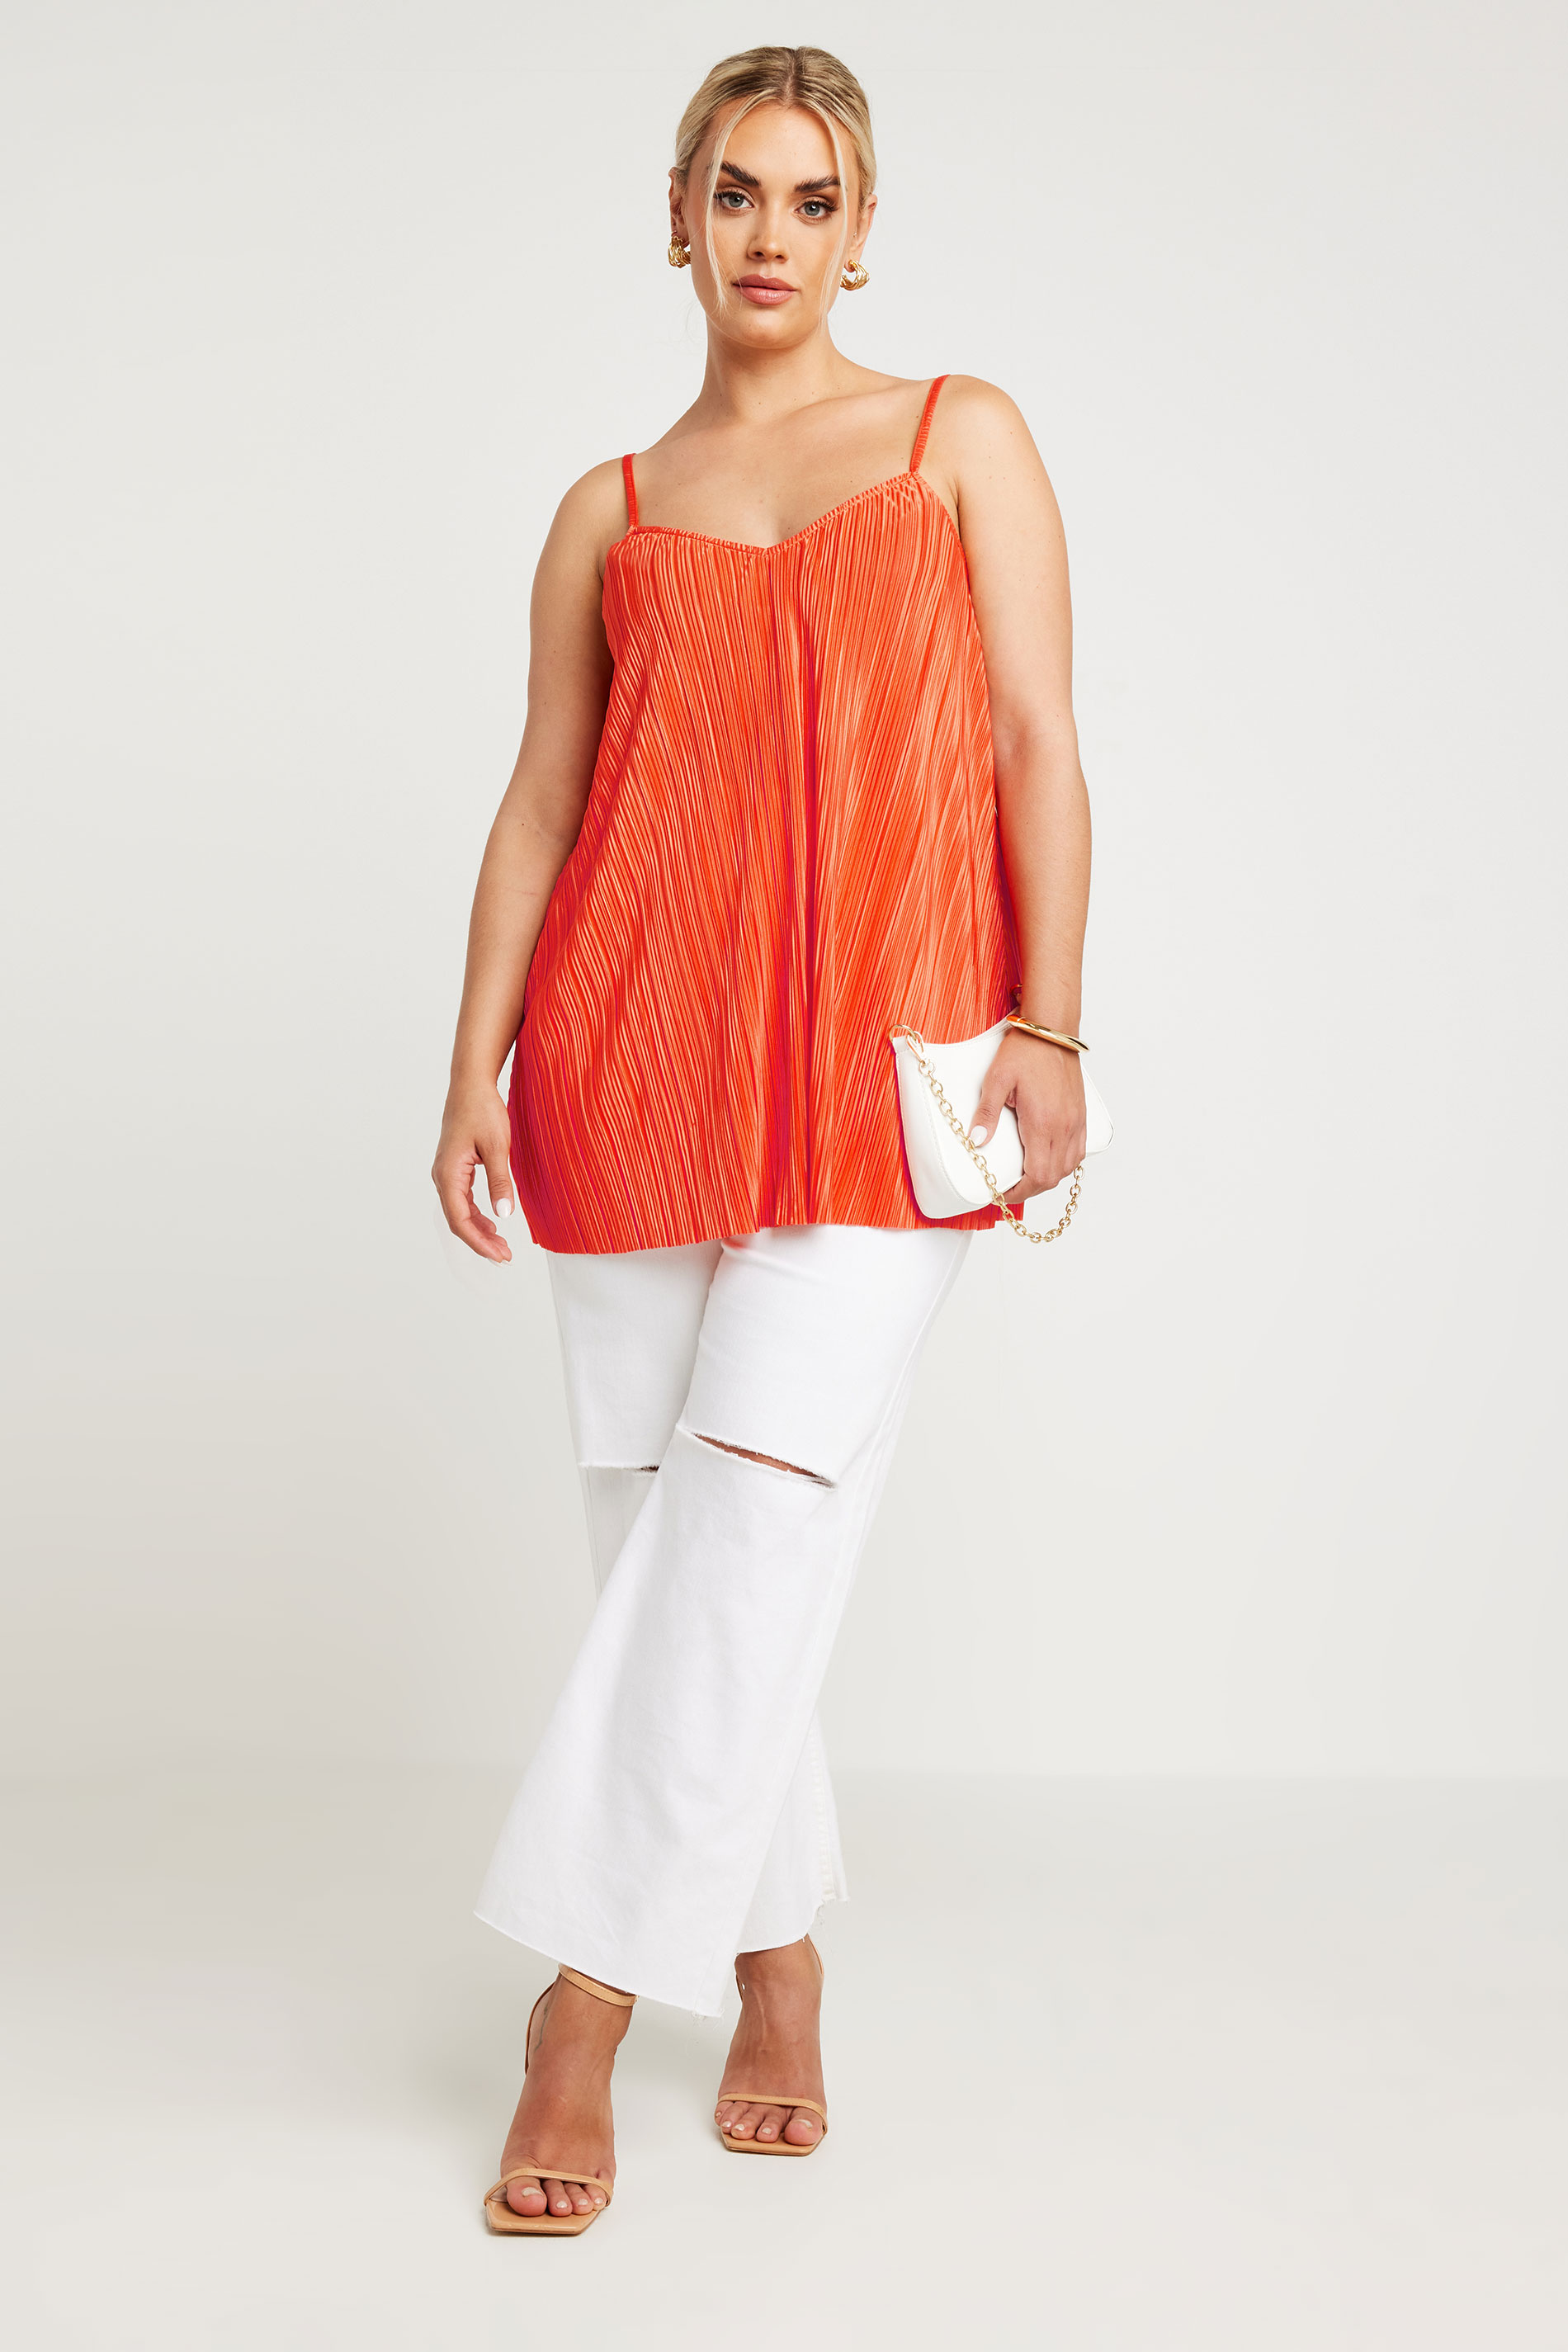 LIMITED COLLECTION Plus Size Orange Plisse Cami Top | Yours Clothing 2